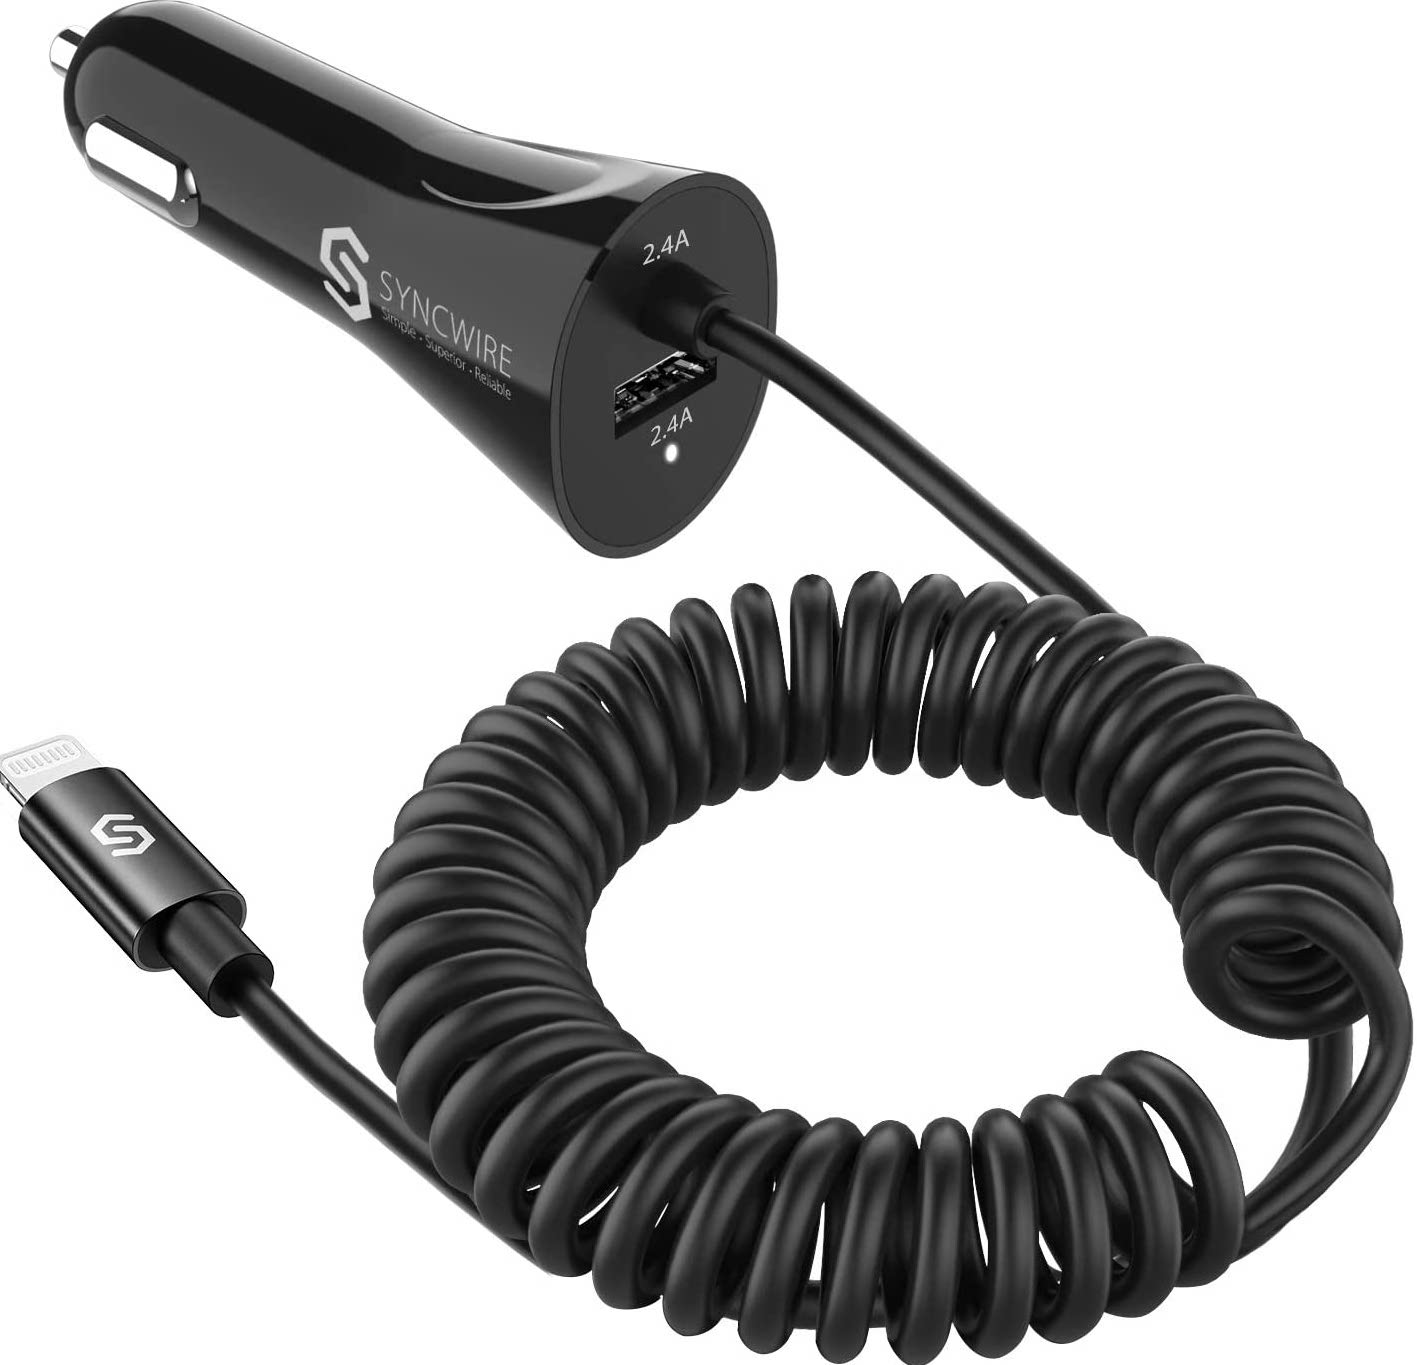 Syncwire Iphone Car Charger Render Cropped